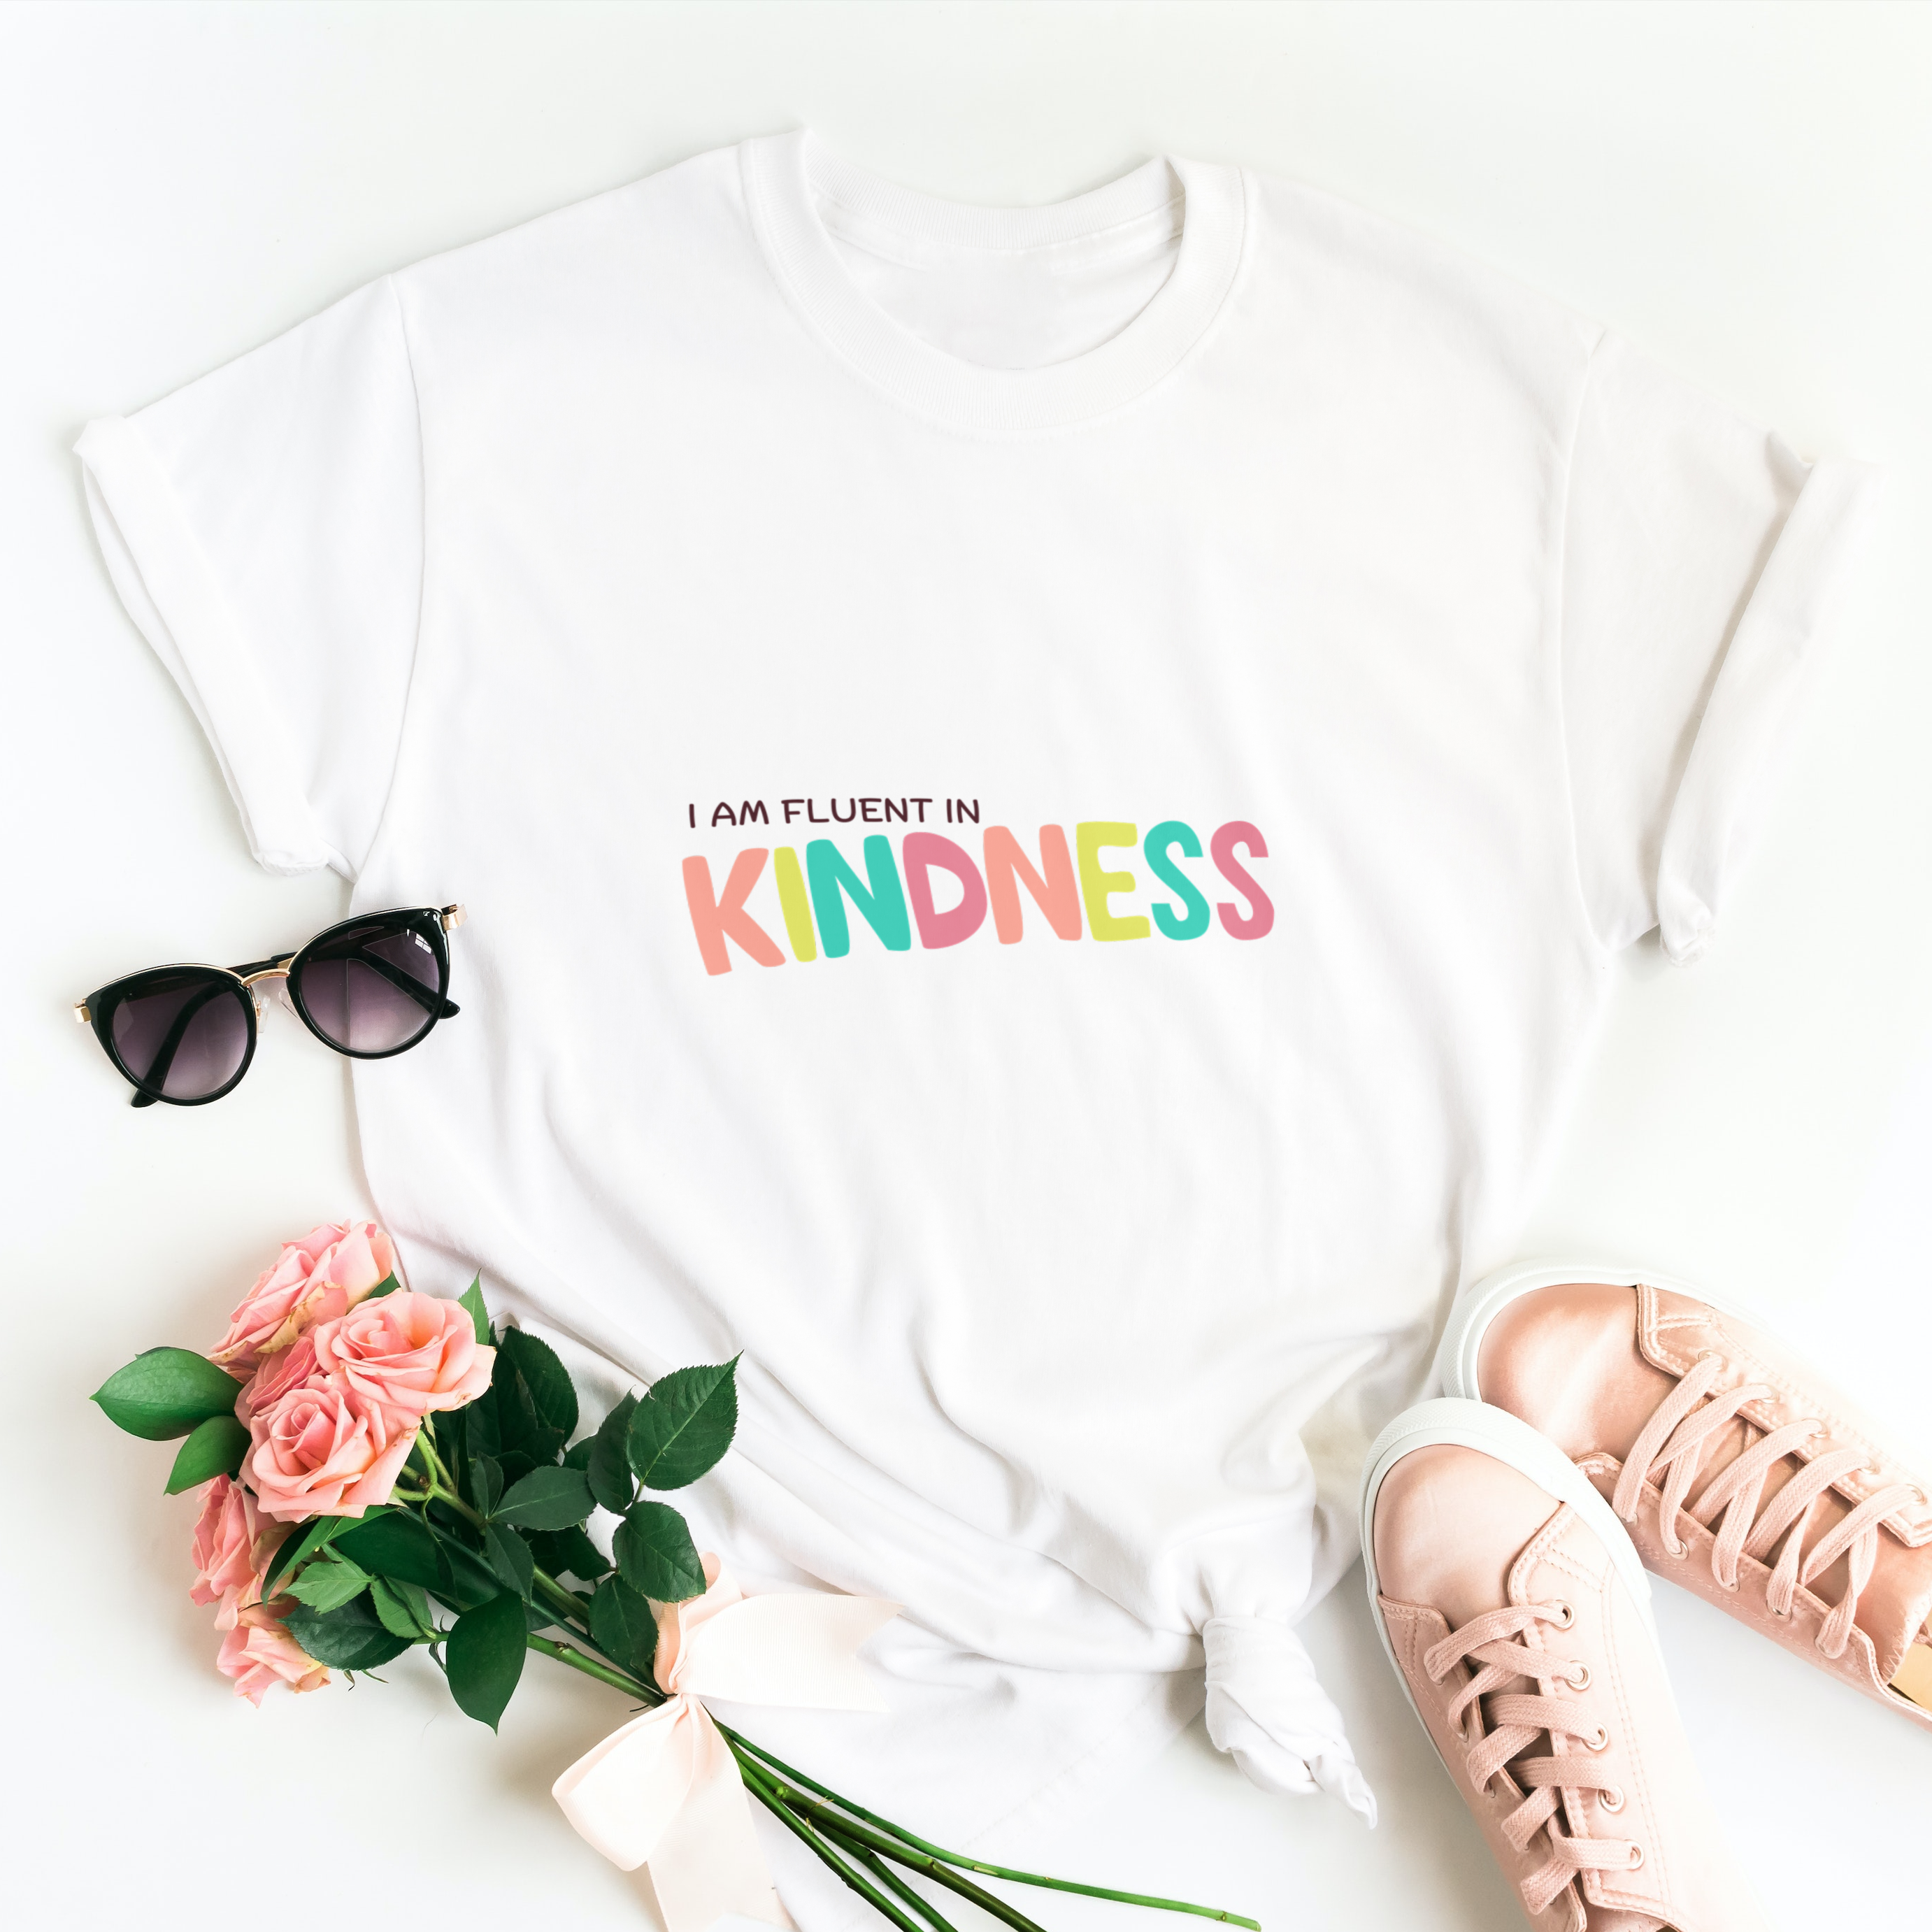 Story of Awakening Lifestyle Community Spirituality Relationships Love Light Meditation Oneness Earth Balance Healing Shop Store Charity Tree Nature Read Write T shirt Tops Tees Clothing Women Horoscope Organic Cotton Fluent In Kindness Quote